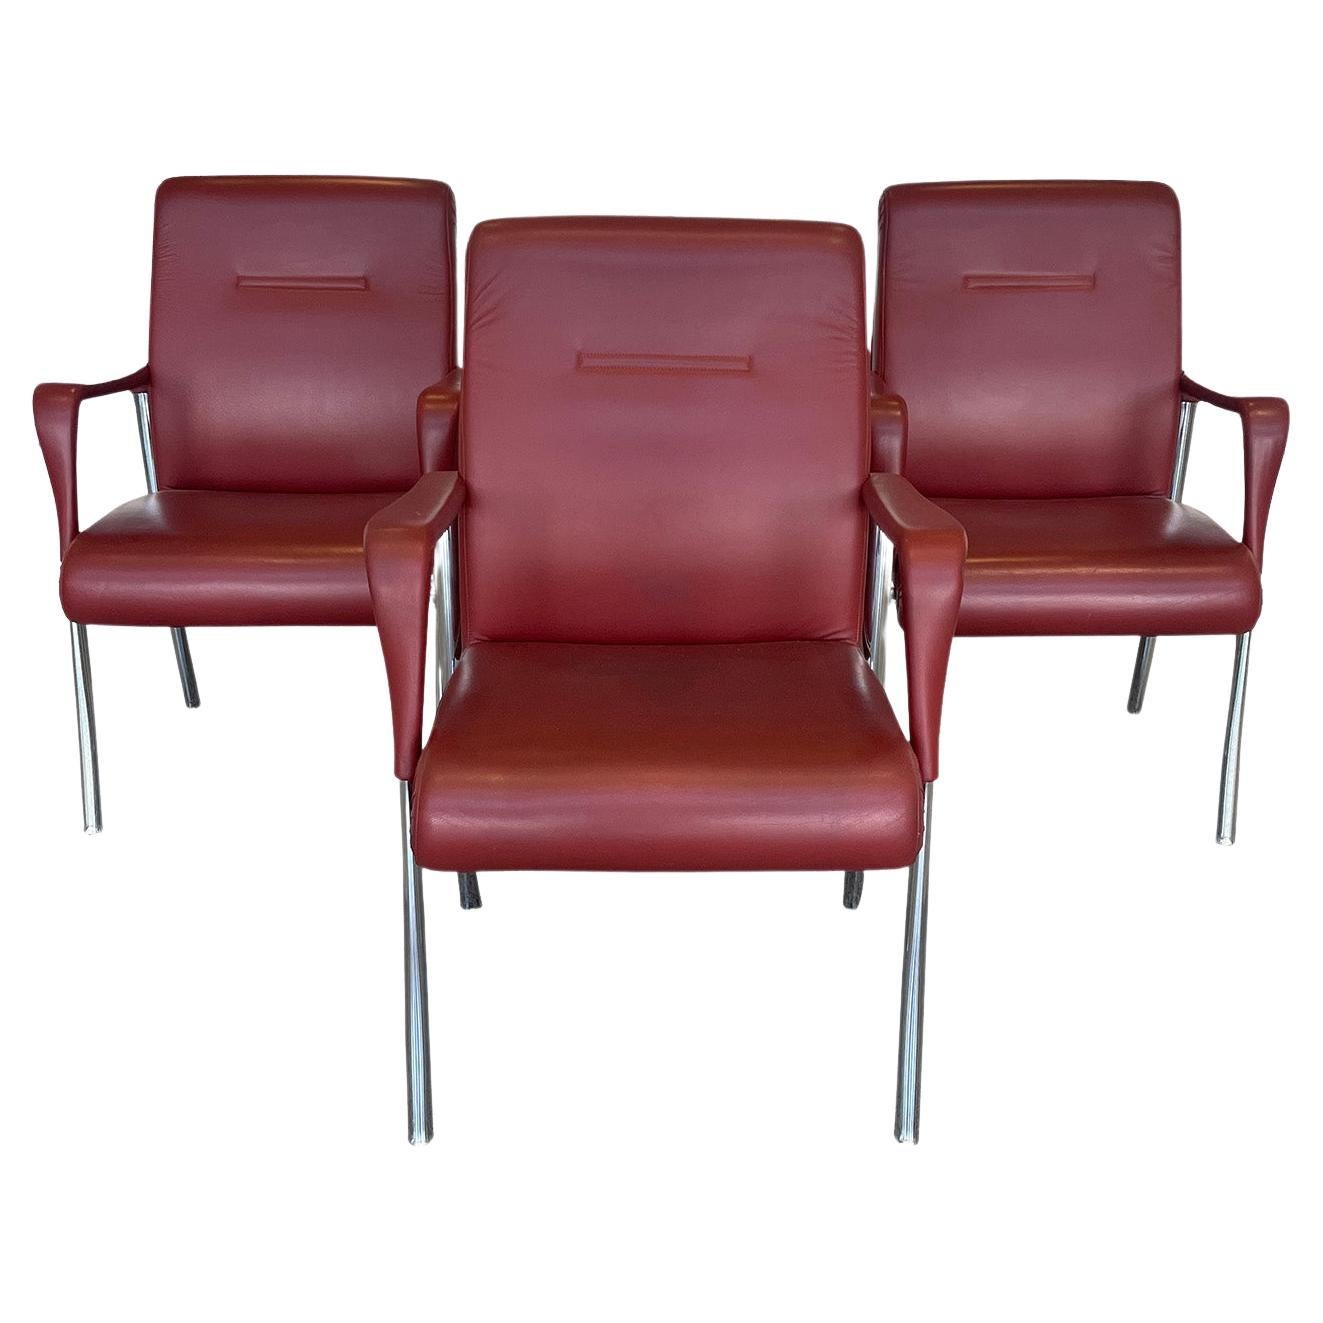 Three Leather Dining or Office Chairs by Poltrona Frau in Oxblood Red Leather For Sale